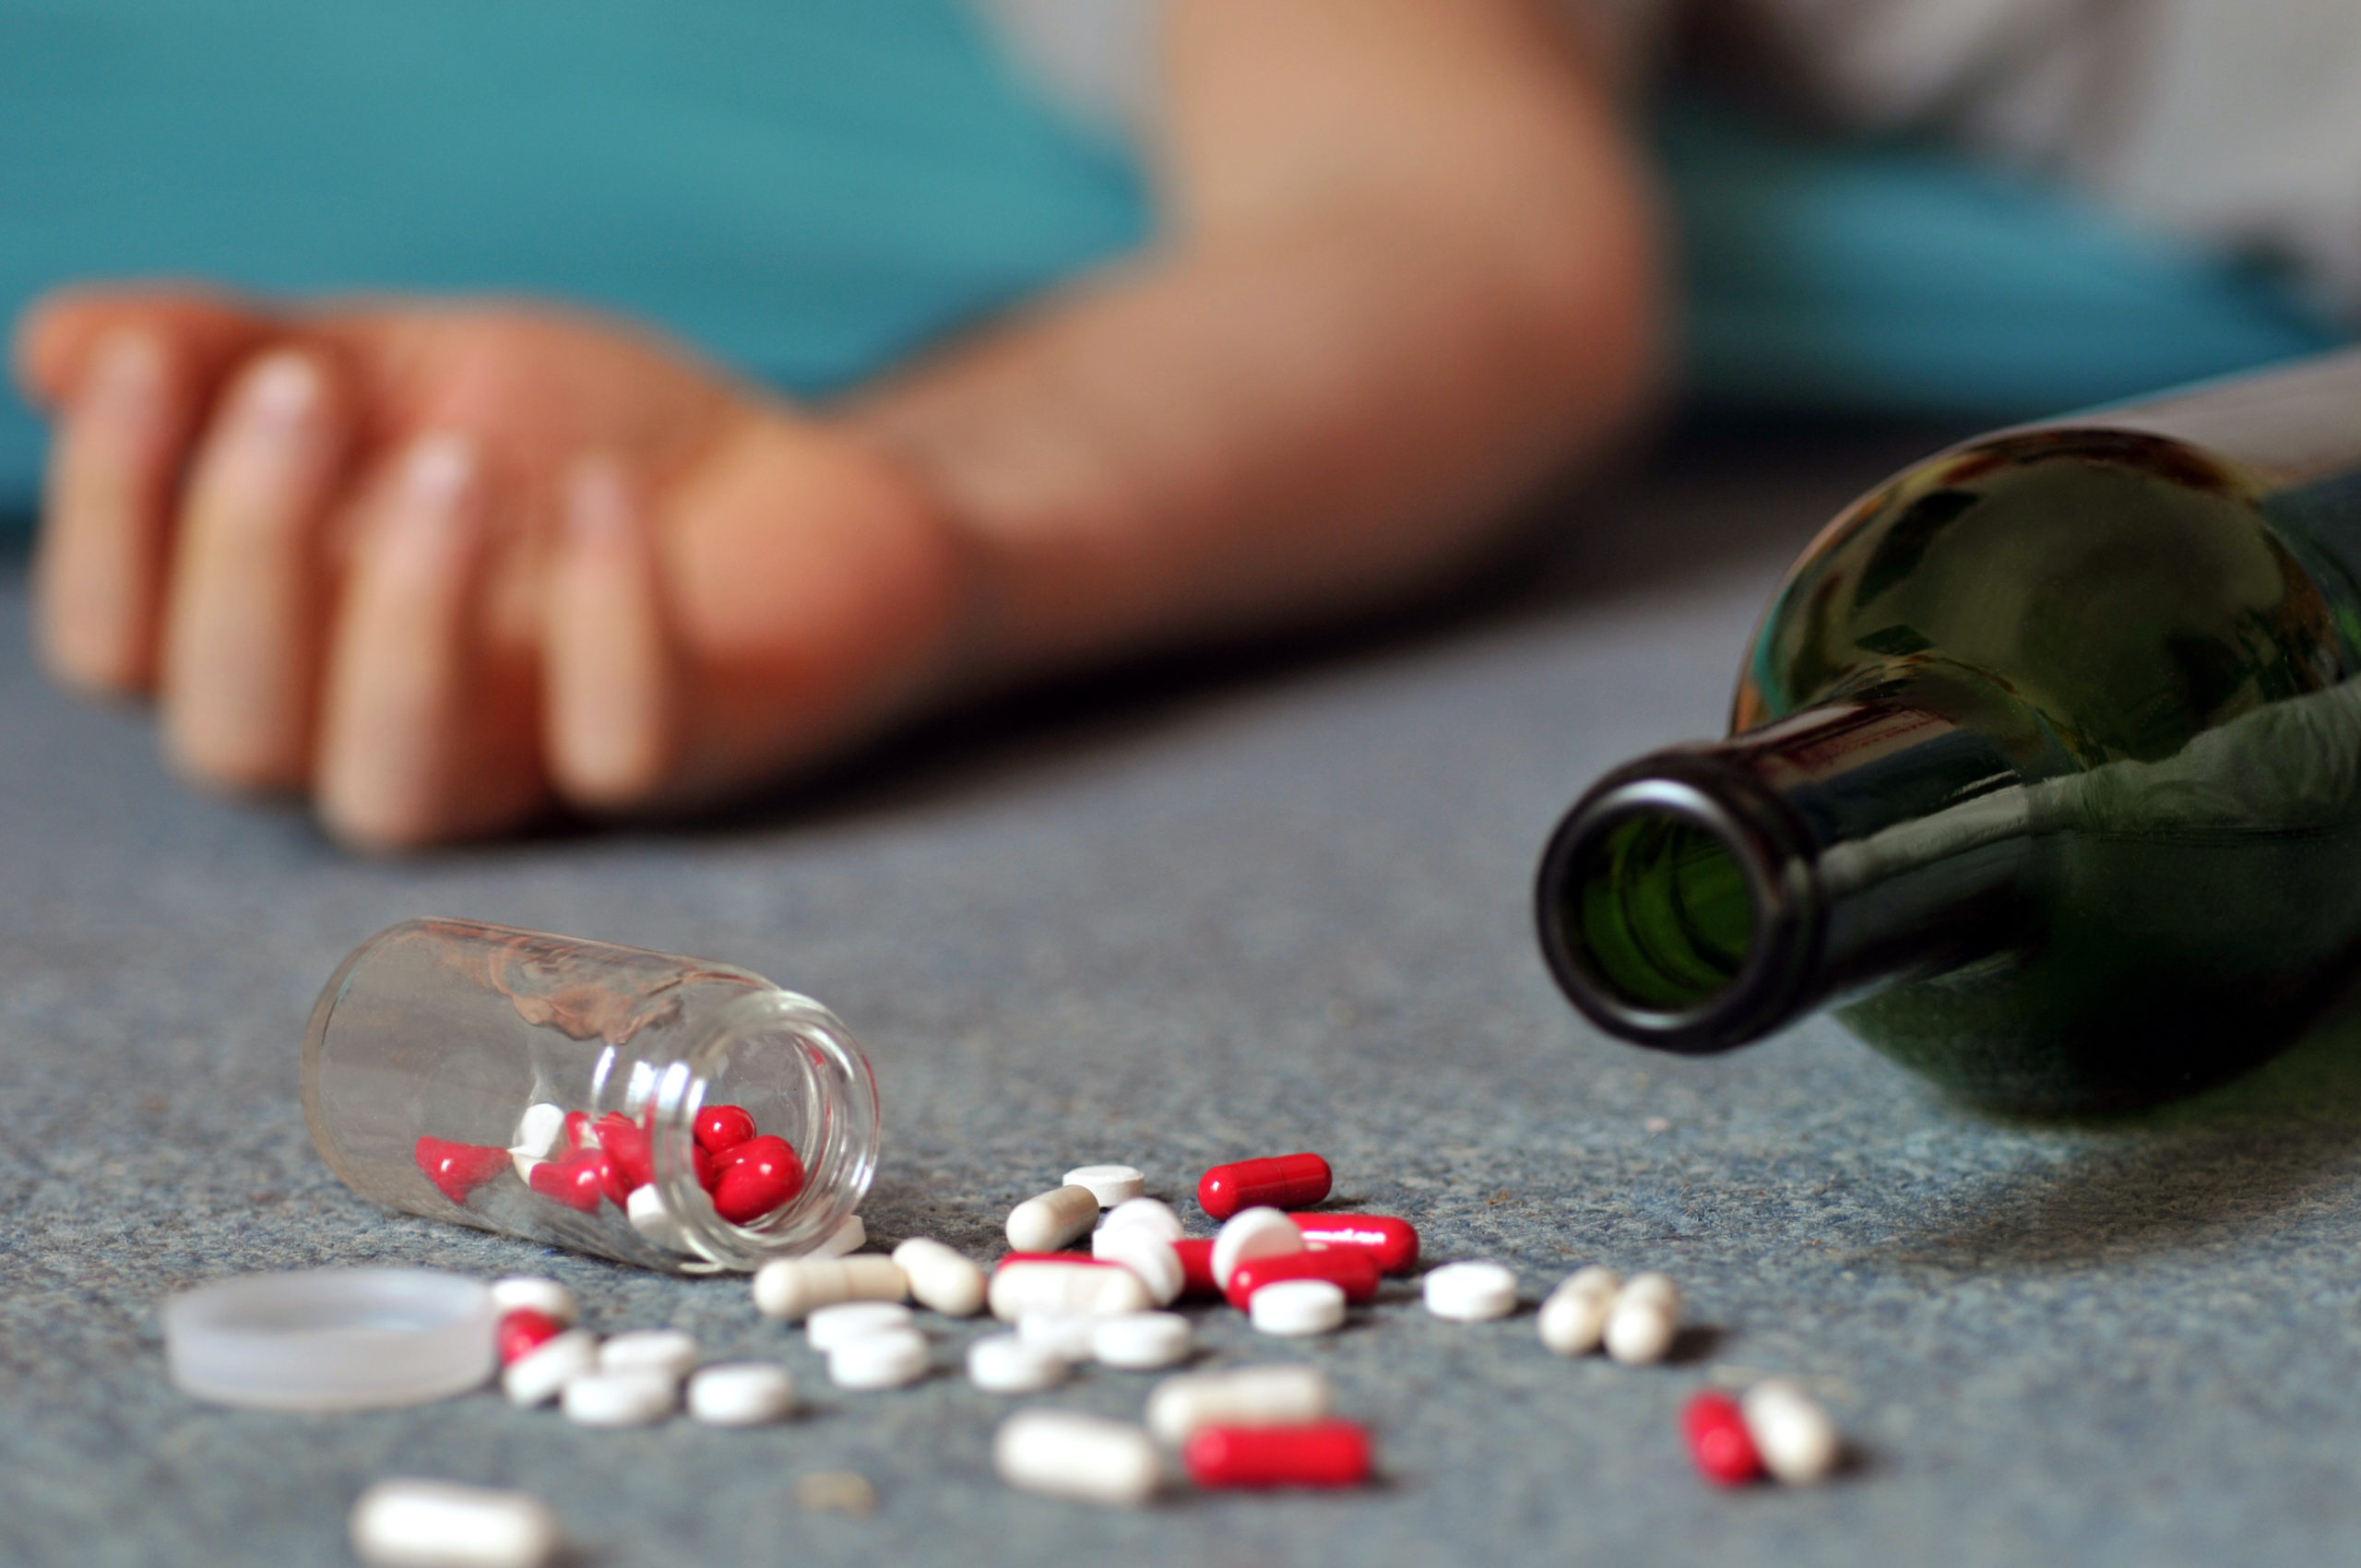 Addiction-Related Suicides Are On The Rise